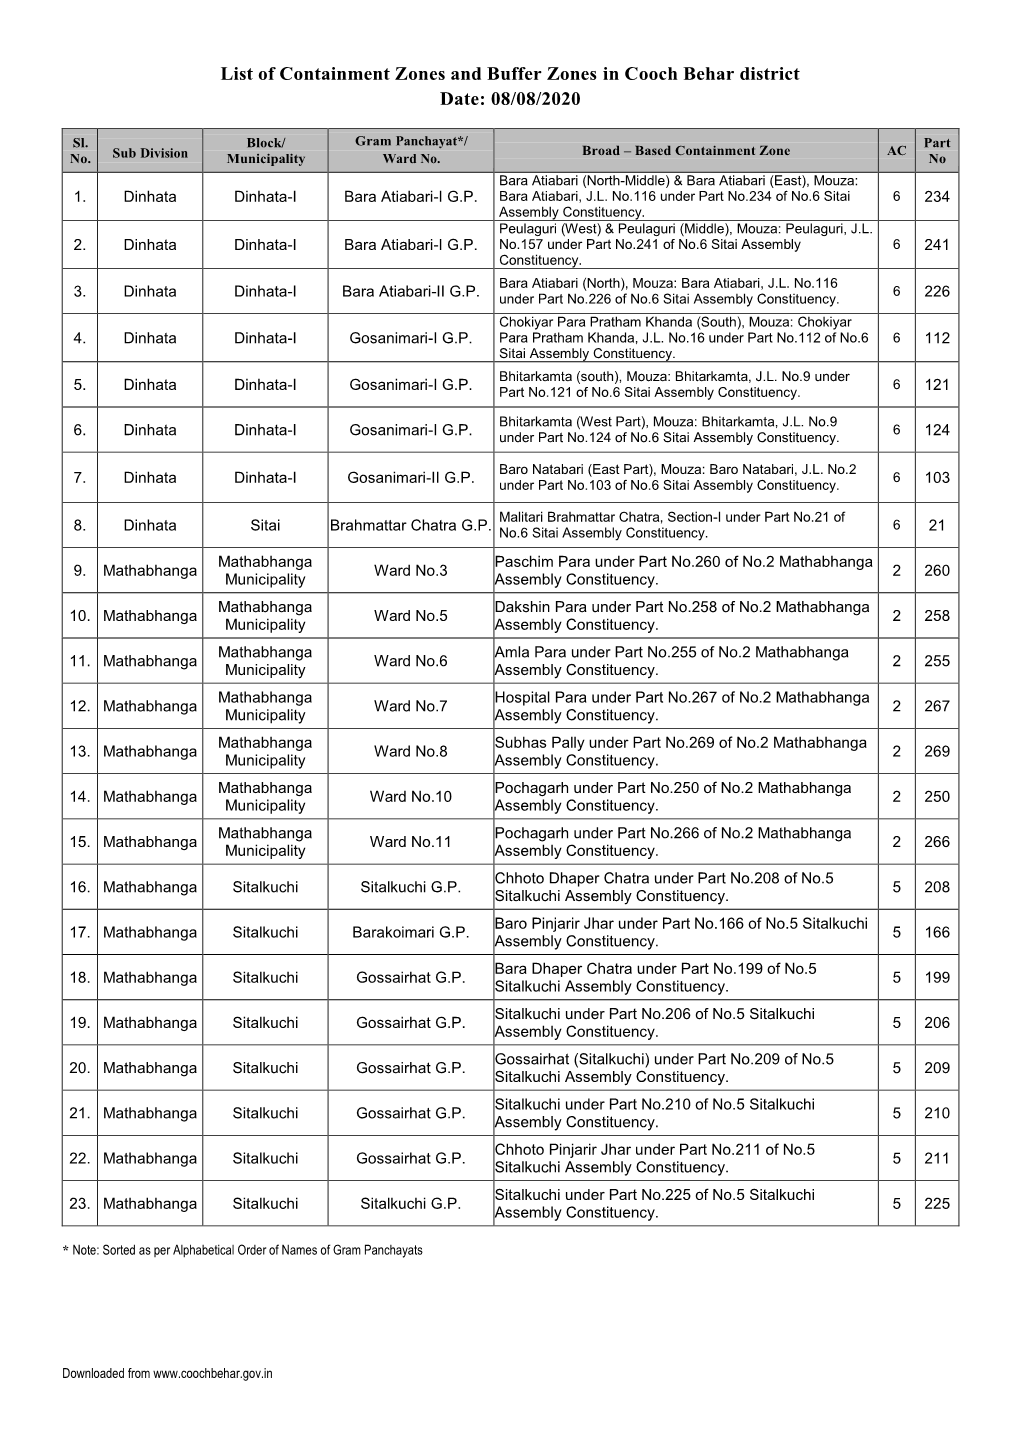 List of Containment Zones and Buffer Zones in Cooch Behar District Date: 08/08/2020